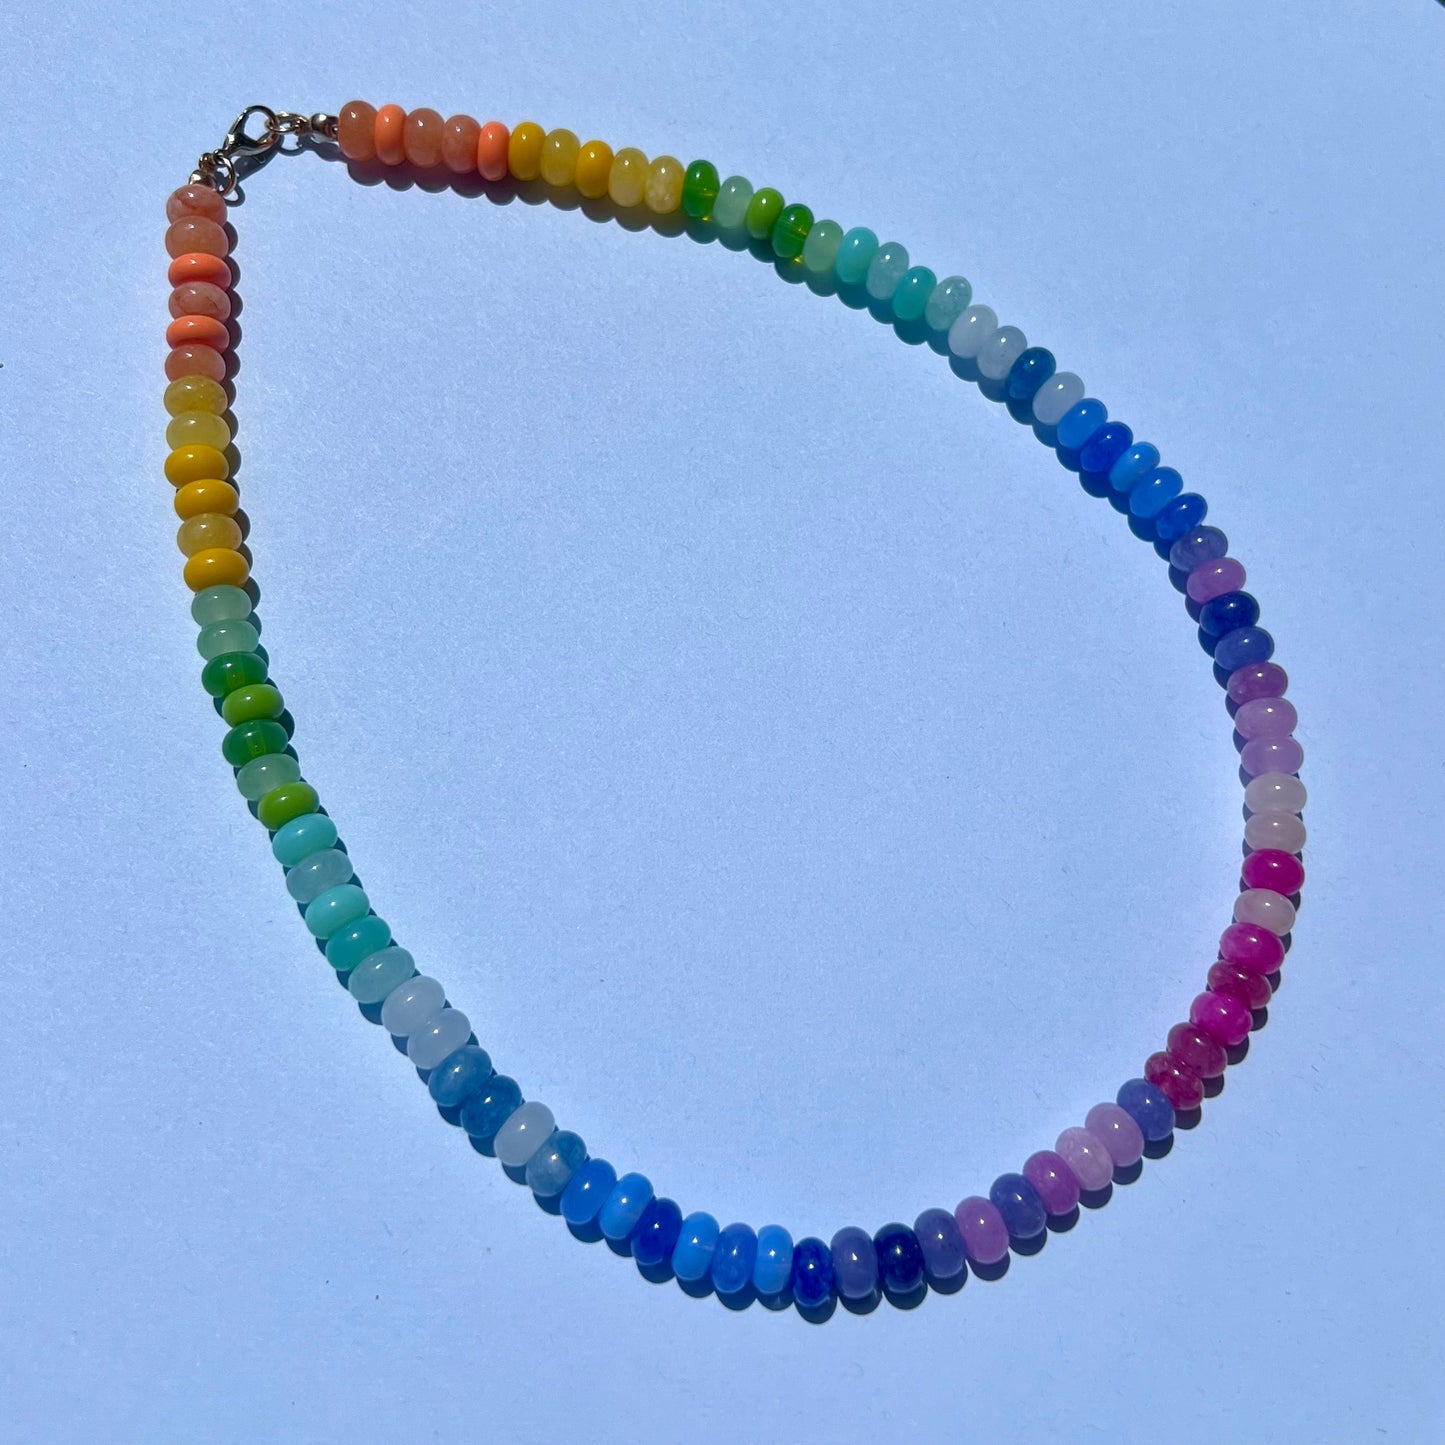 Skittles Necklace